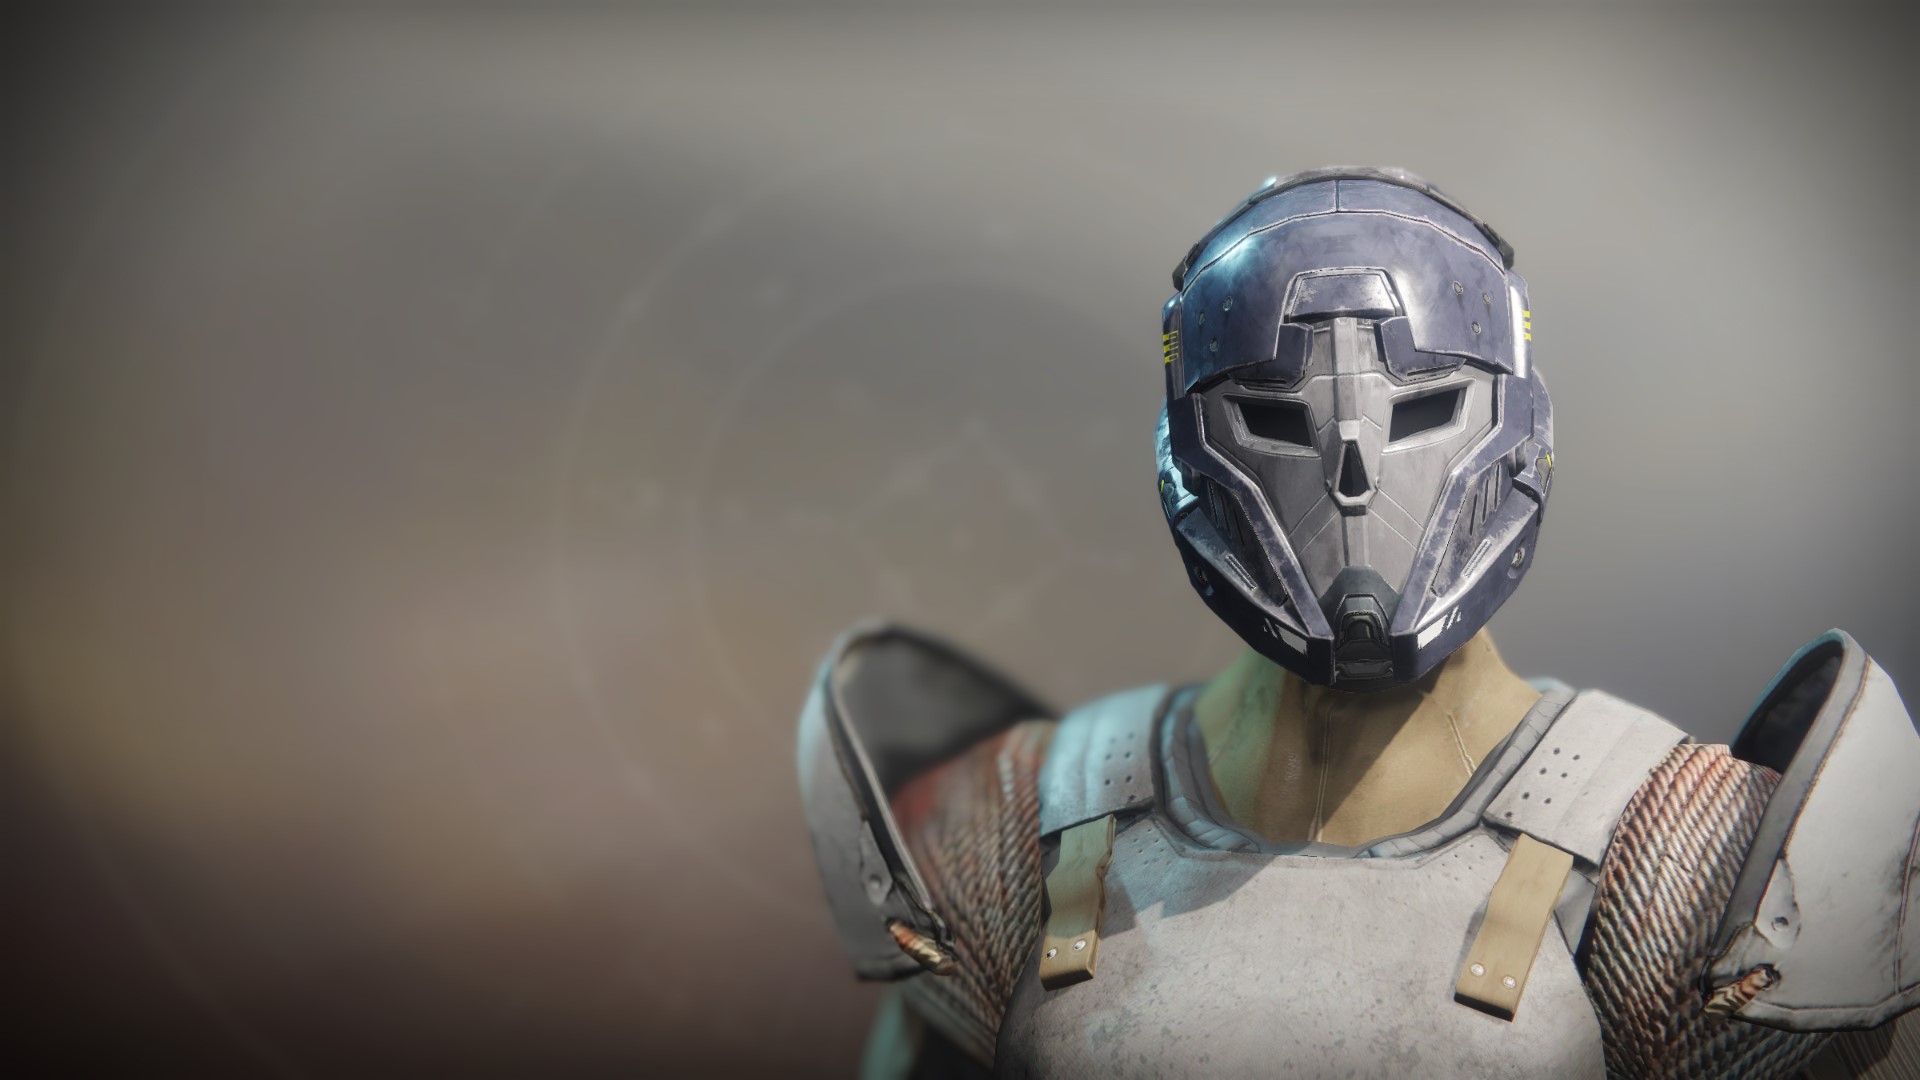 An in-game render of the Prodigal Helm.